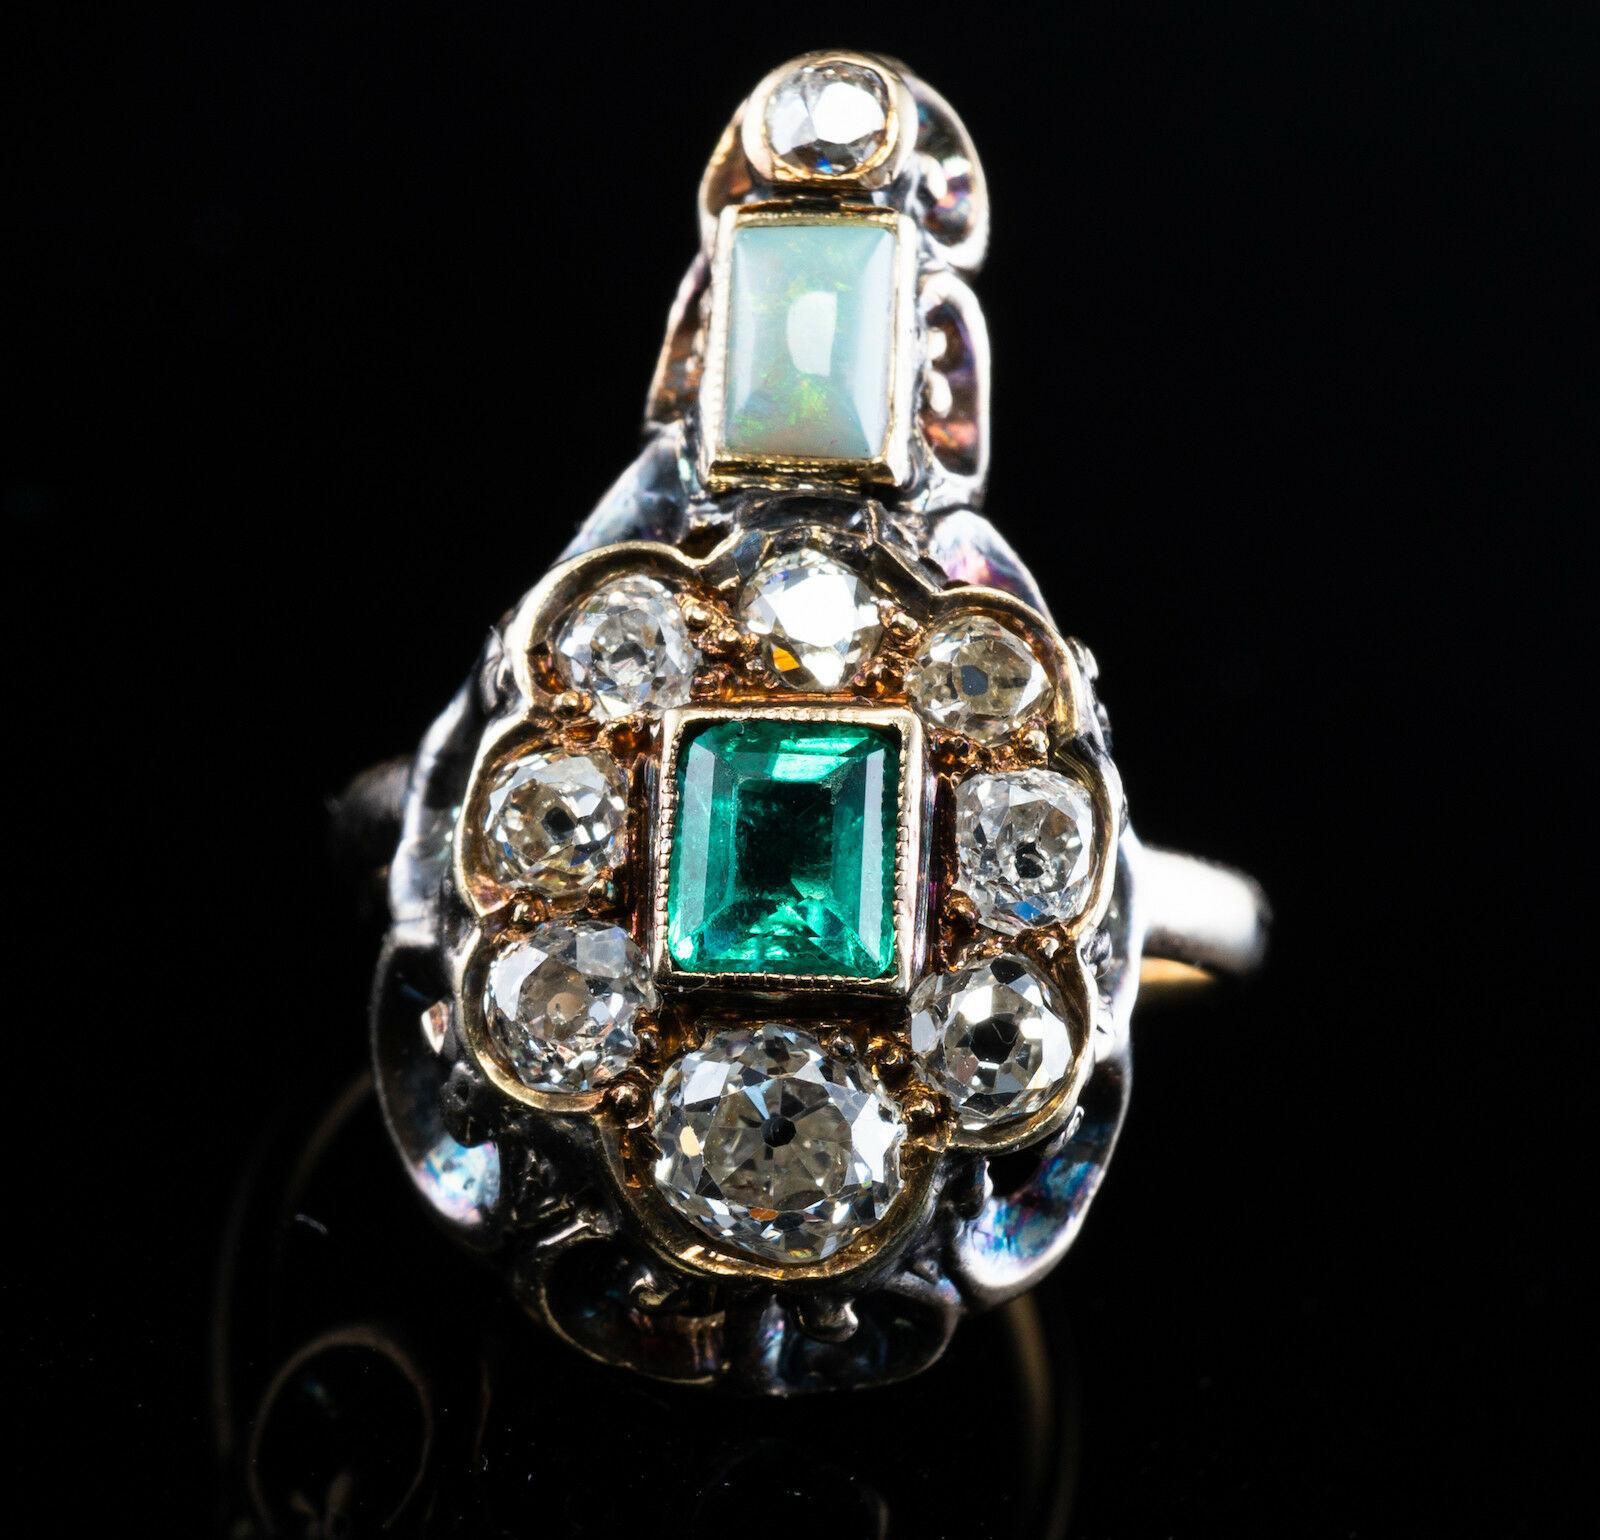 Georgian Emerald Diamond Opal Ring 14K Gold Antique, c.1820s In Good Condition For Sale In East Brunswick, NJ